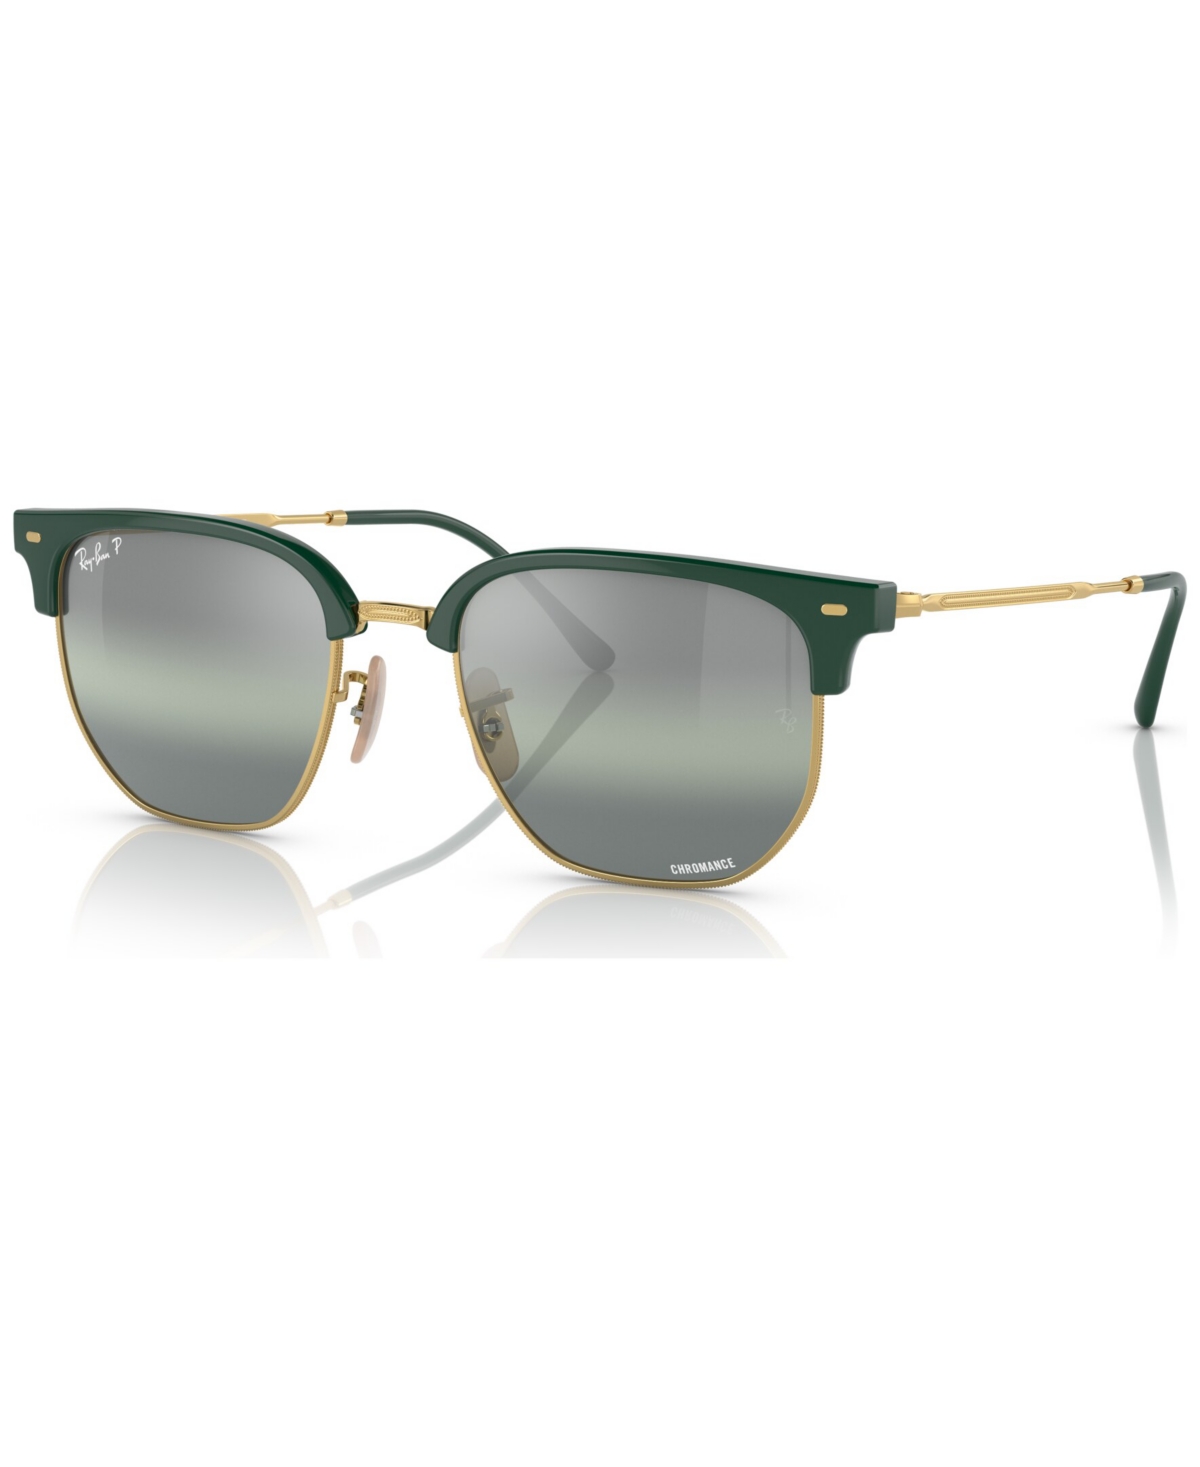 Shop Ray Ban New Clubmaster Polarized Sunglasses, Rb4416 In Green On Arista